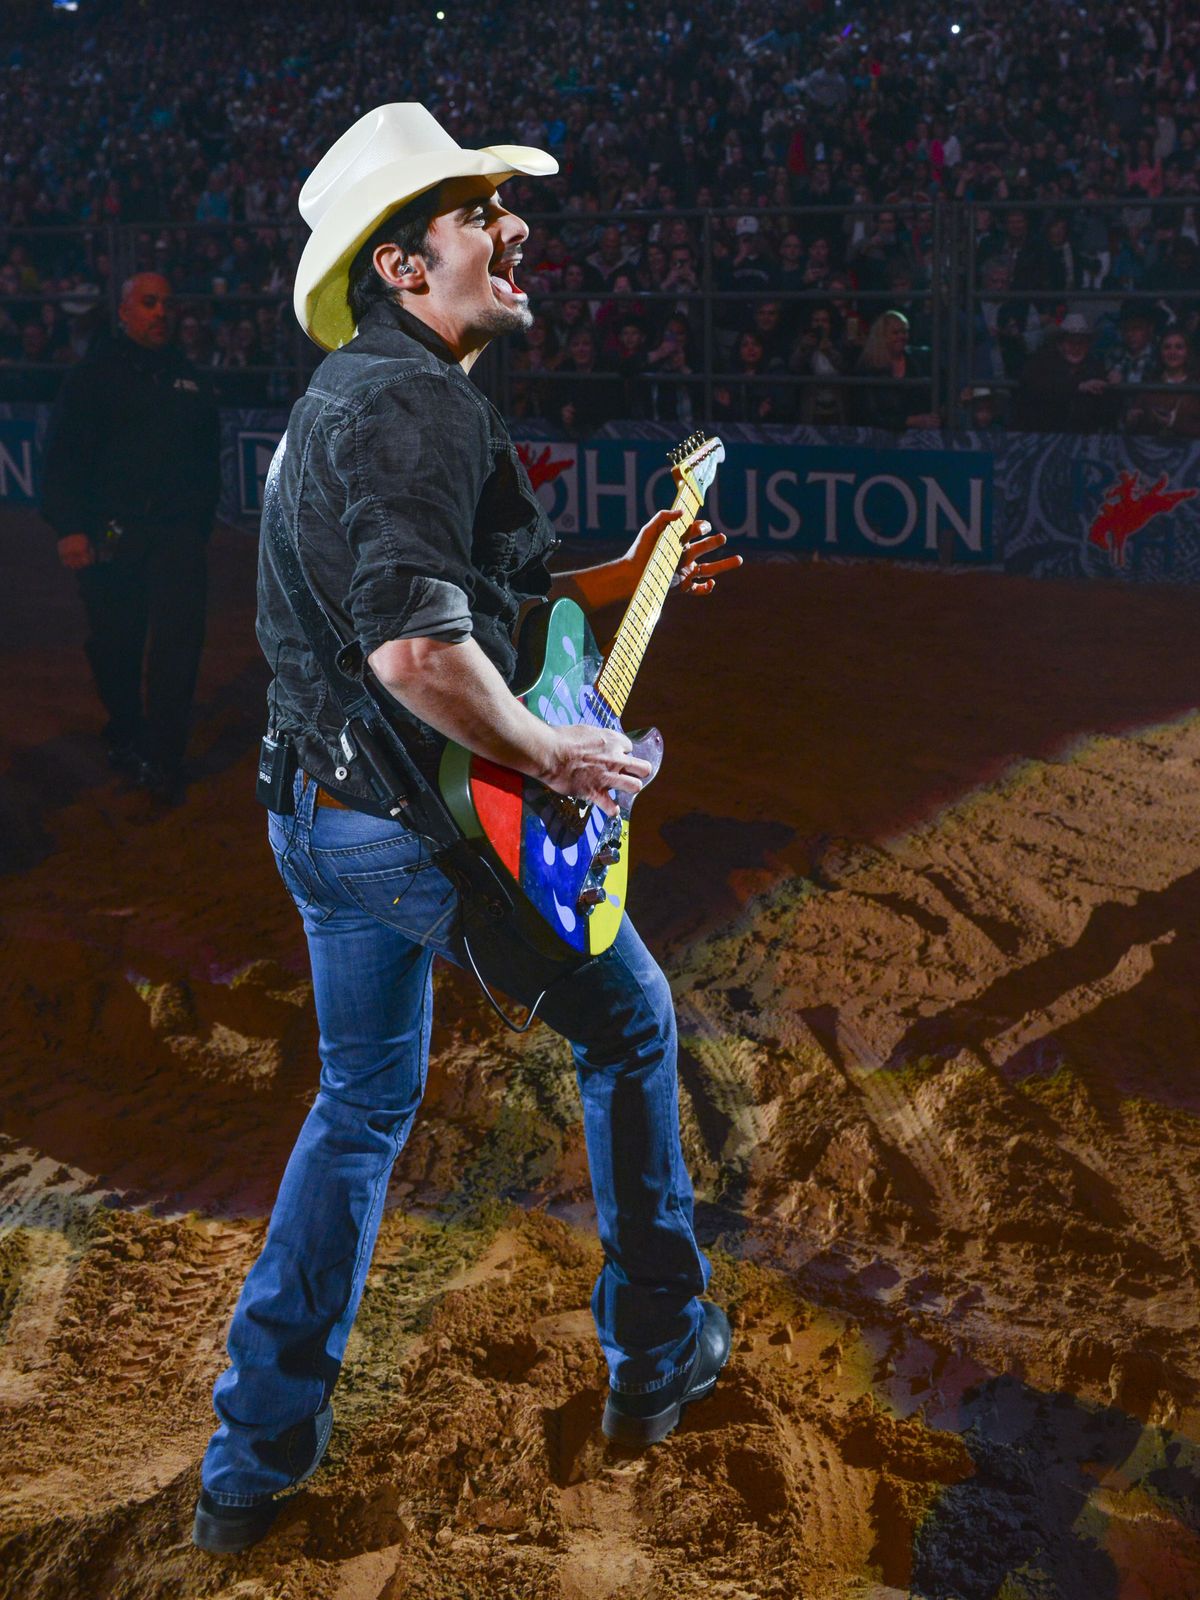 Brad Paisley got into the dirt in his Rodeo moment. CultureMap Houston